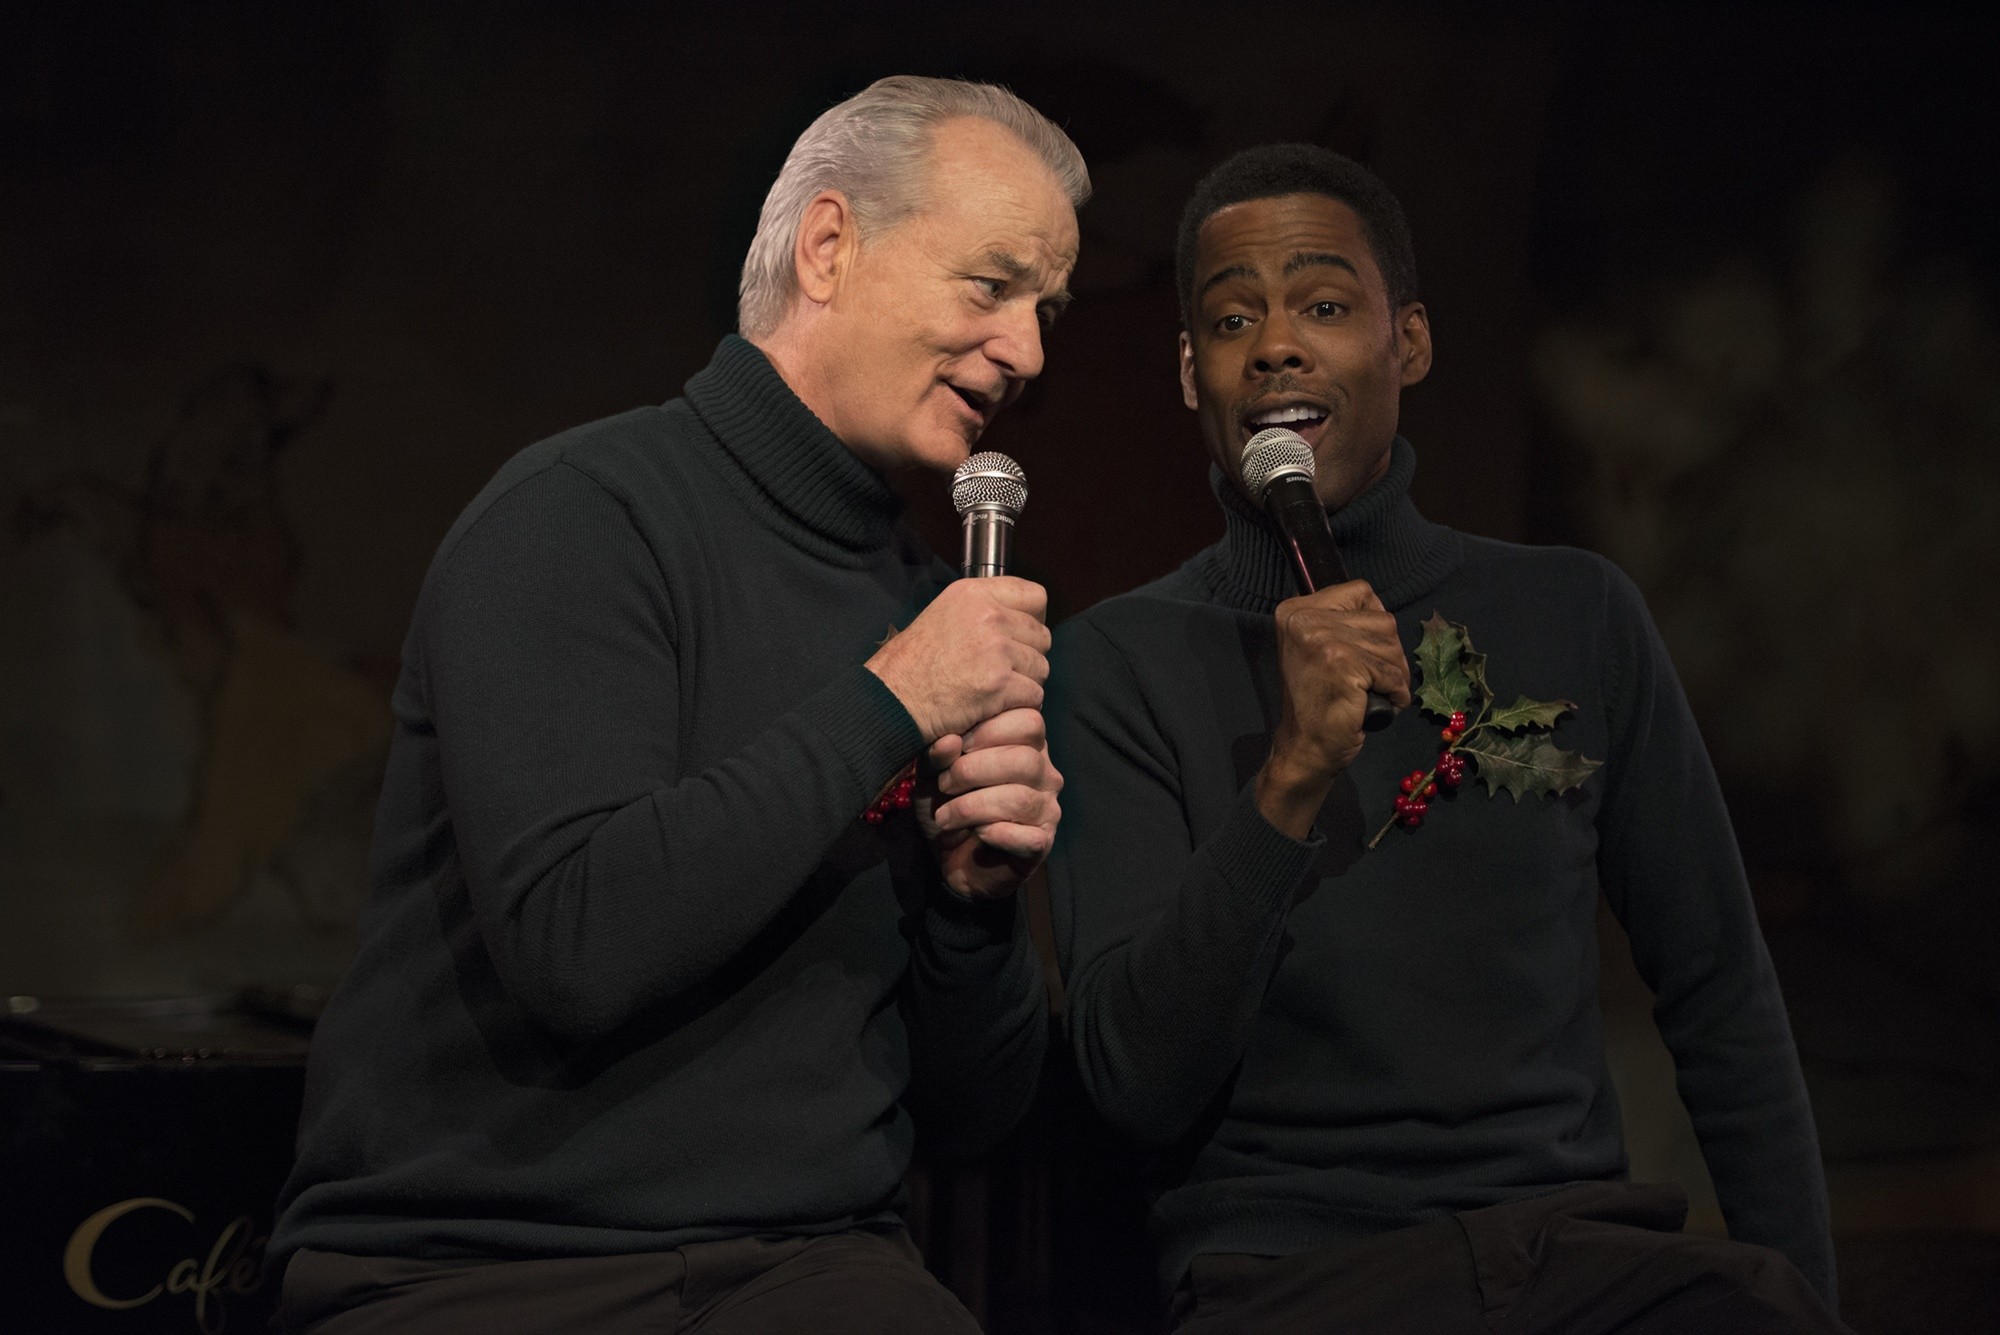 Bill Murray and Chris Rock in Netflix's A Very Murray Christmas (2015)